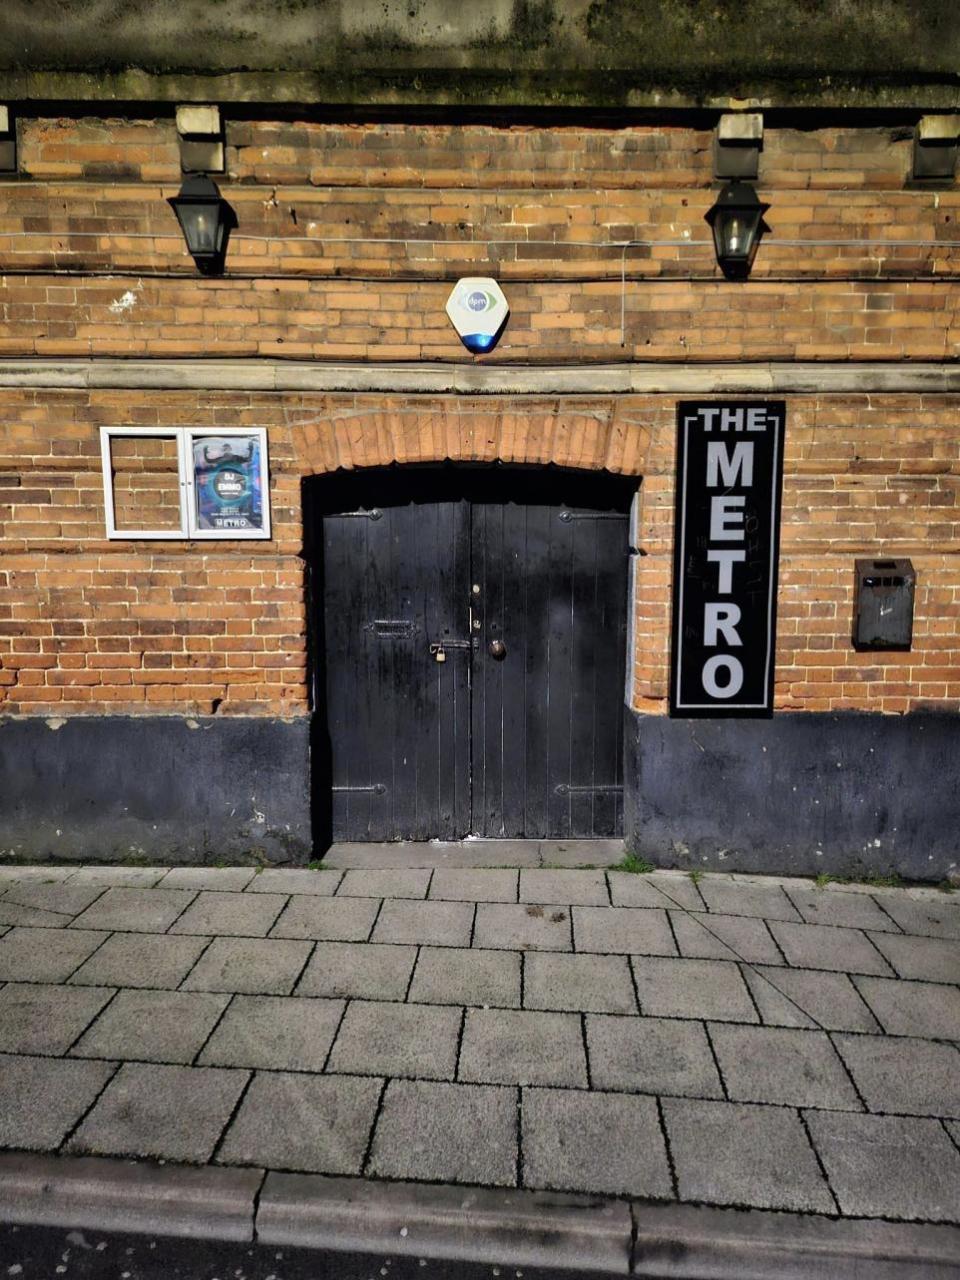 Eastern Daily Press: The Metro nightclub is based in a cellar bar in the Old Corn Exchange in the town